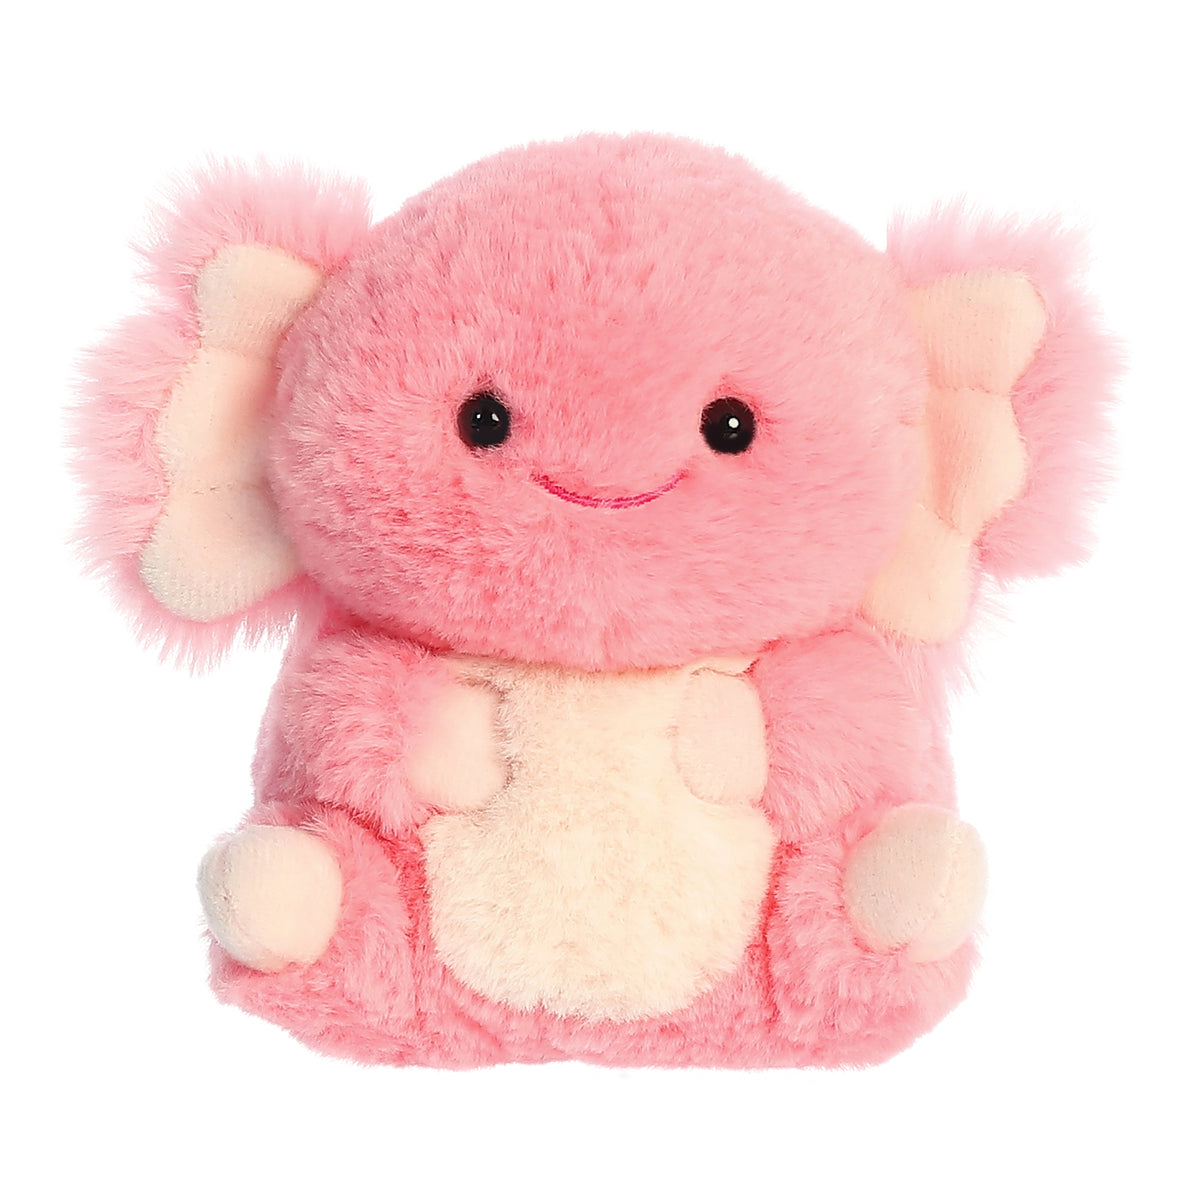 Axolotl plush, bright pink with light pink accents, cheerfully sitting, with its arms across its tummy and legs pointing up!